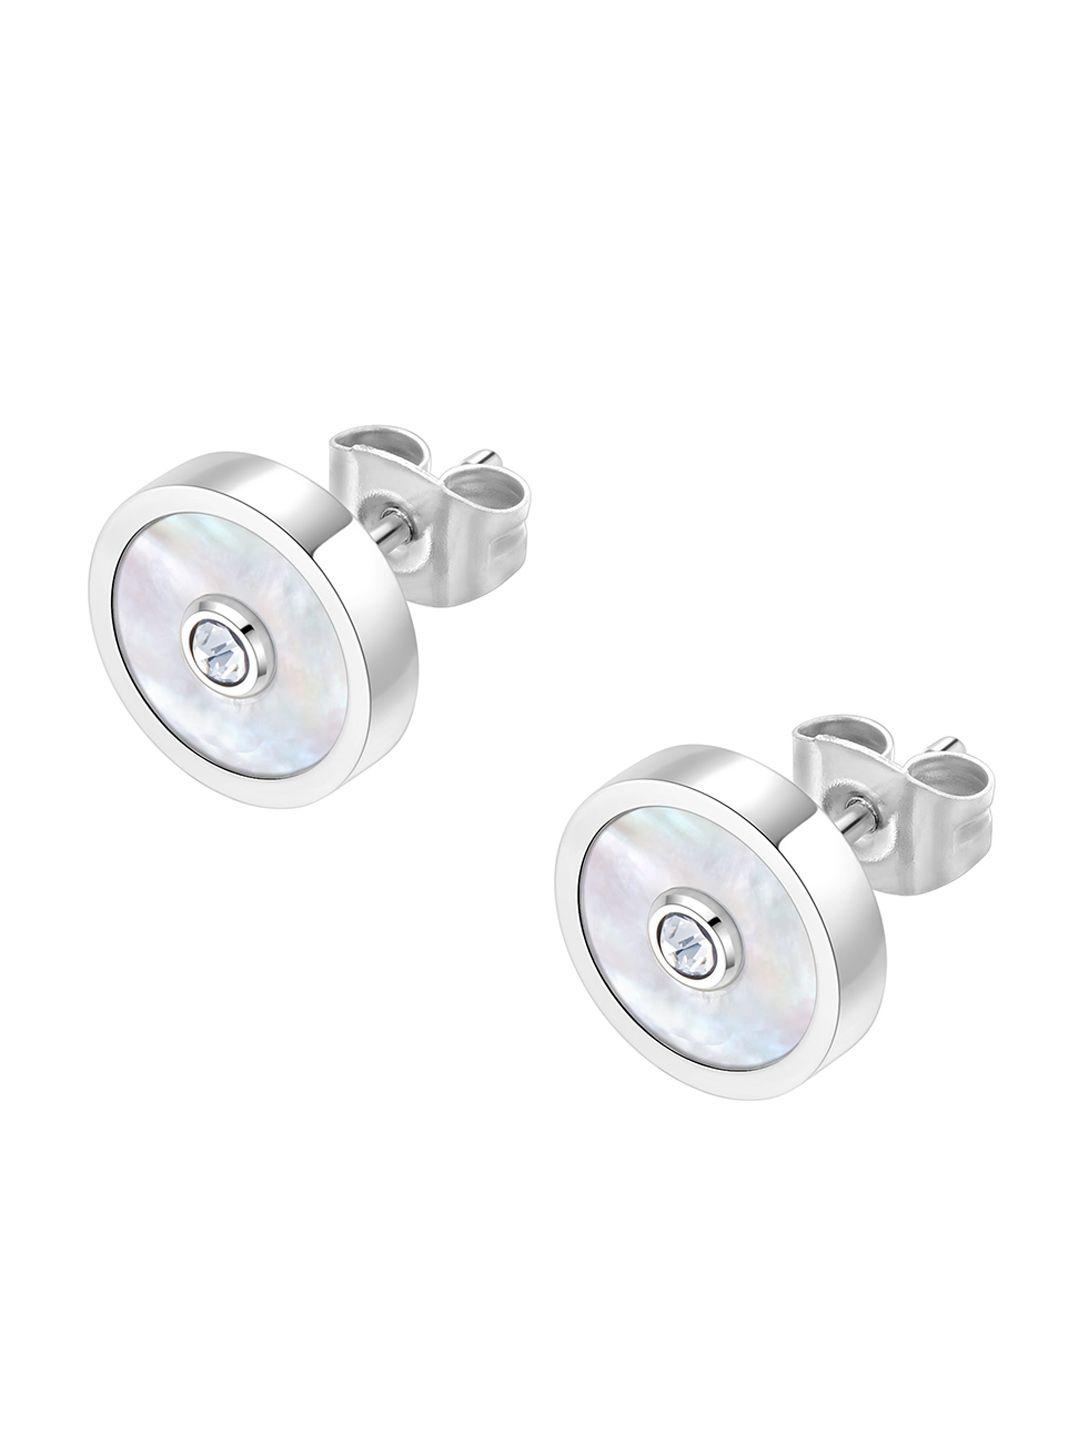 police silver-plated contemporary studs earrings